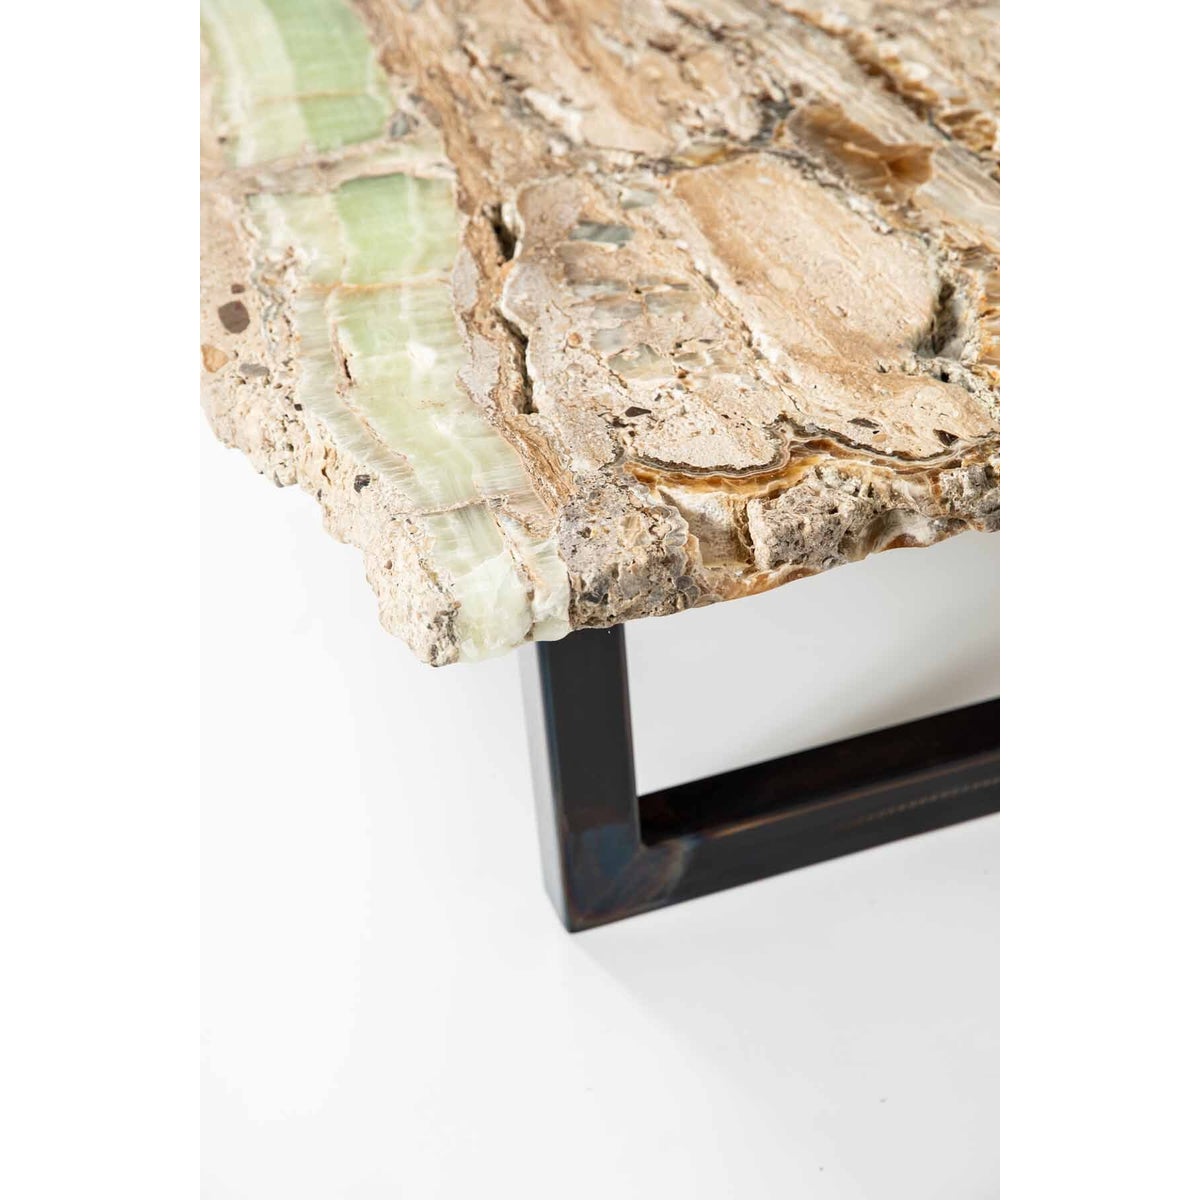 Onyx Cocktail Table - Beige with Green Onyx